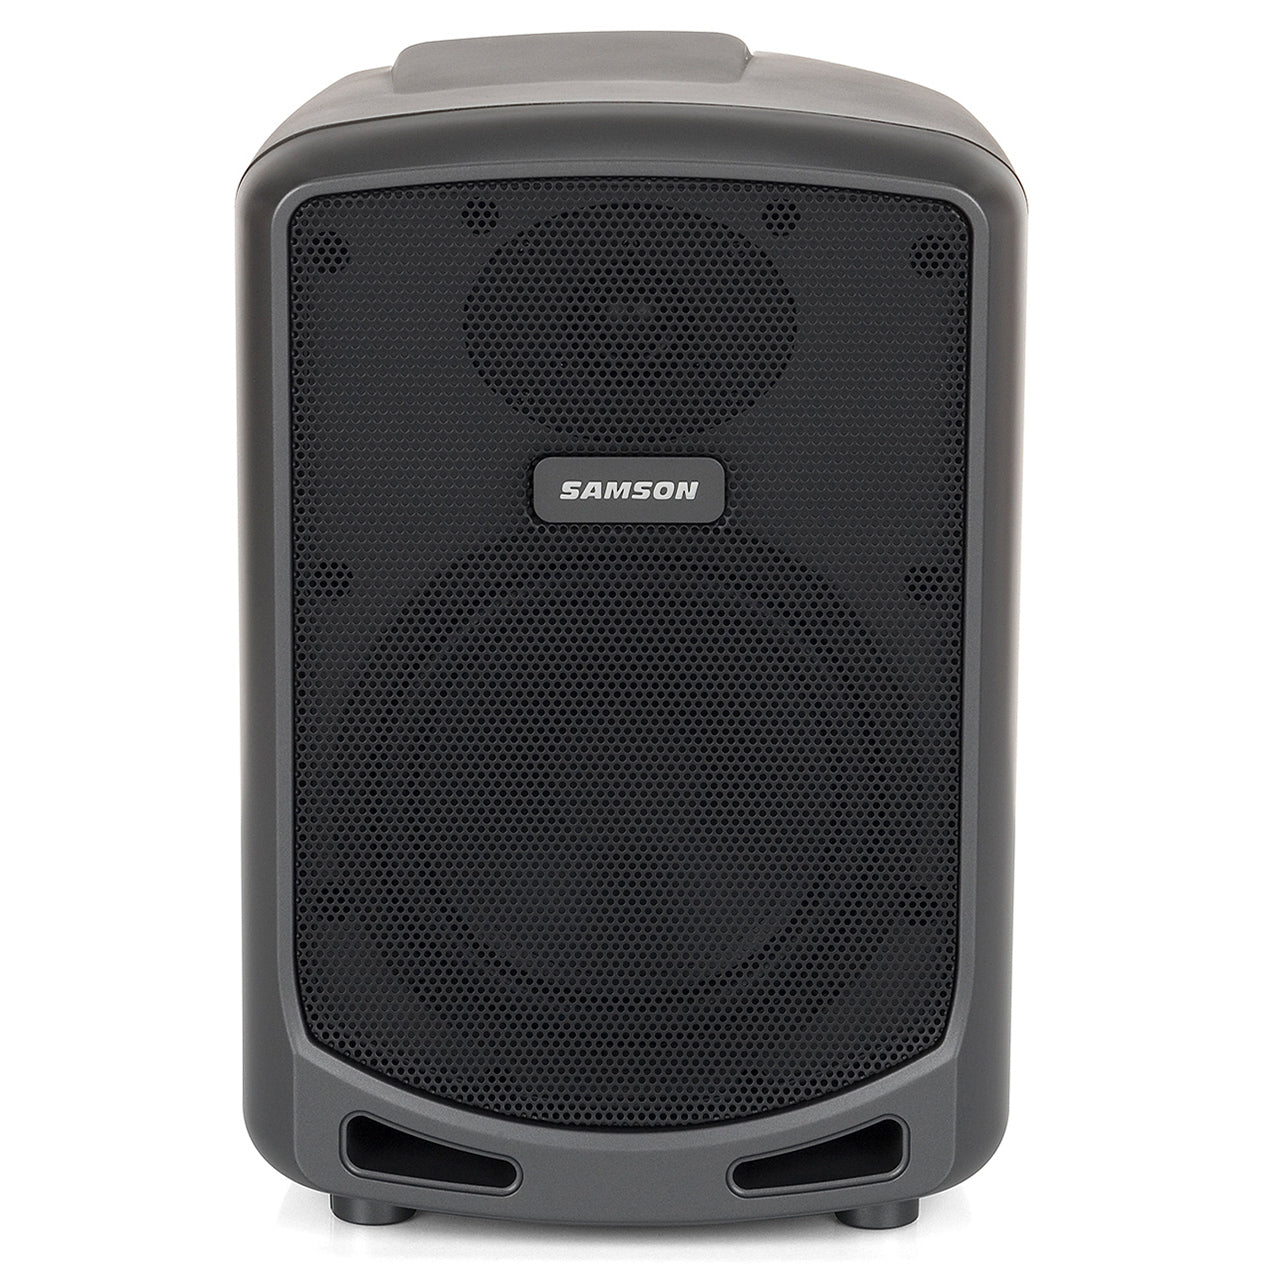 Samson Expedition Express+ Plus Rechargeable PA System Wireless Bluetooth Speaker 75 Watts with Handheld Microphone, 3 Channel Mixer, 20h Playtime